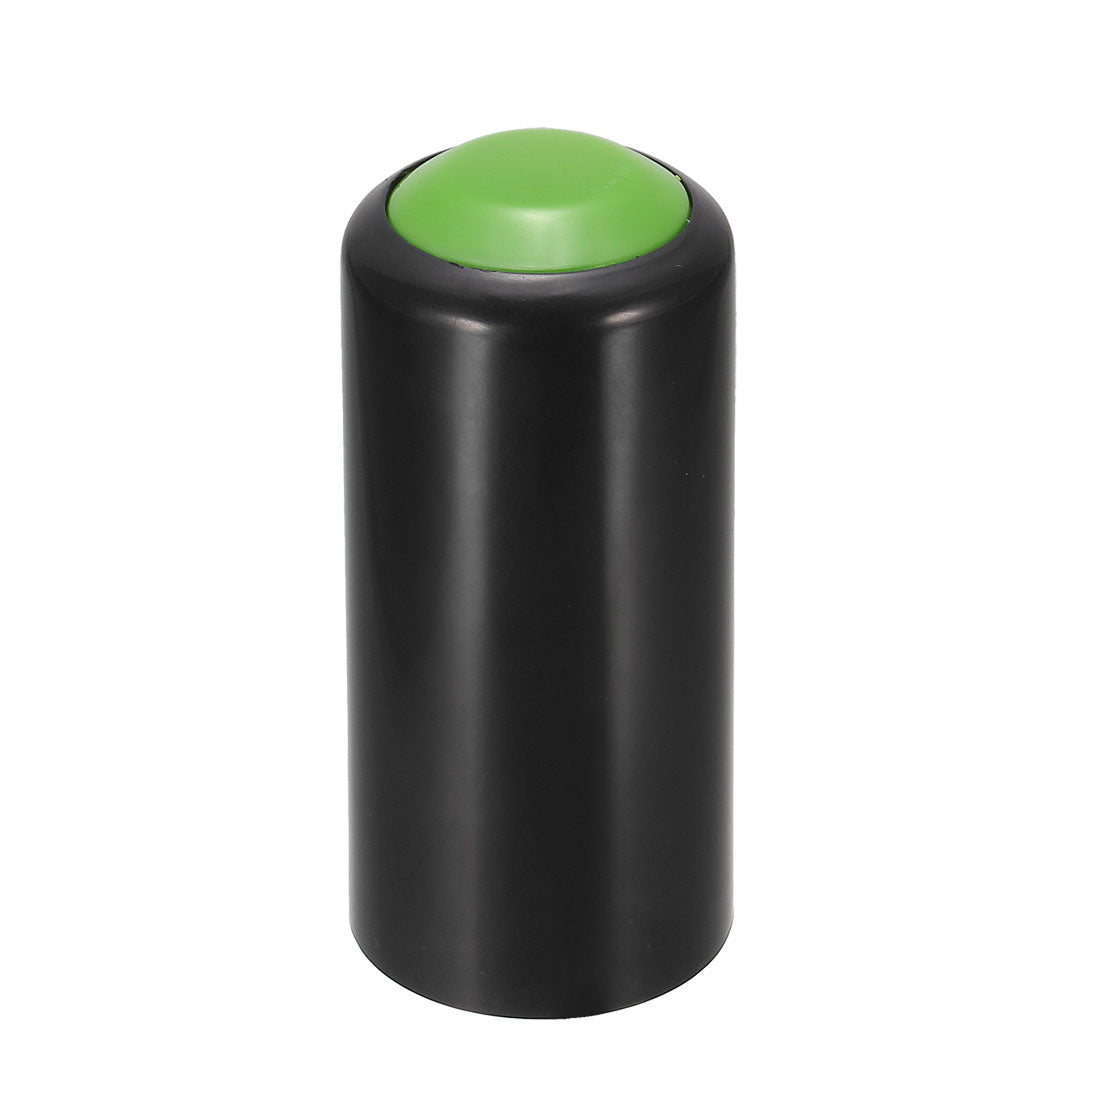 uxcell Uxcell Battery Cover Mic Battery Screw on Cap Cup Cover for PGX24 SLX24 PG58 SM58 BETA58 Wireless Green